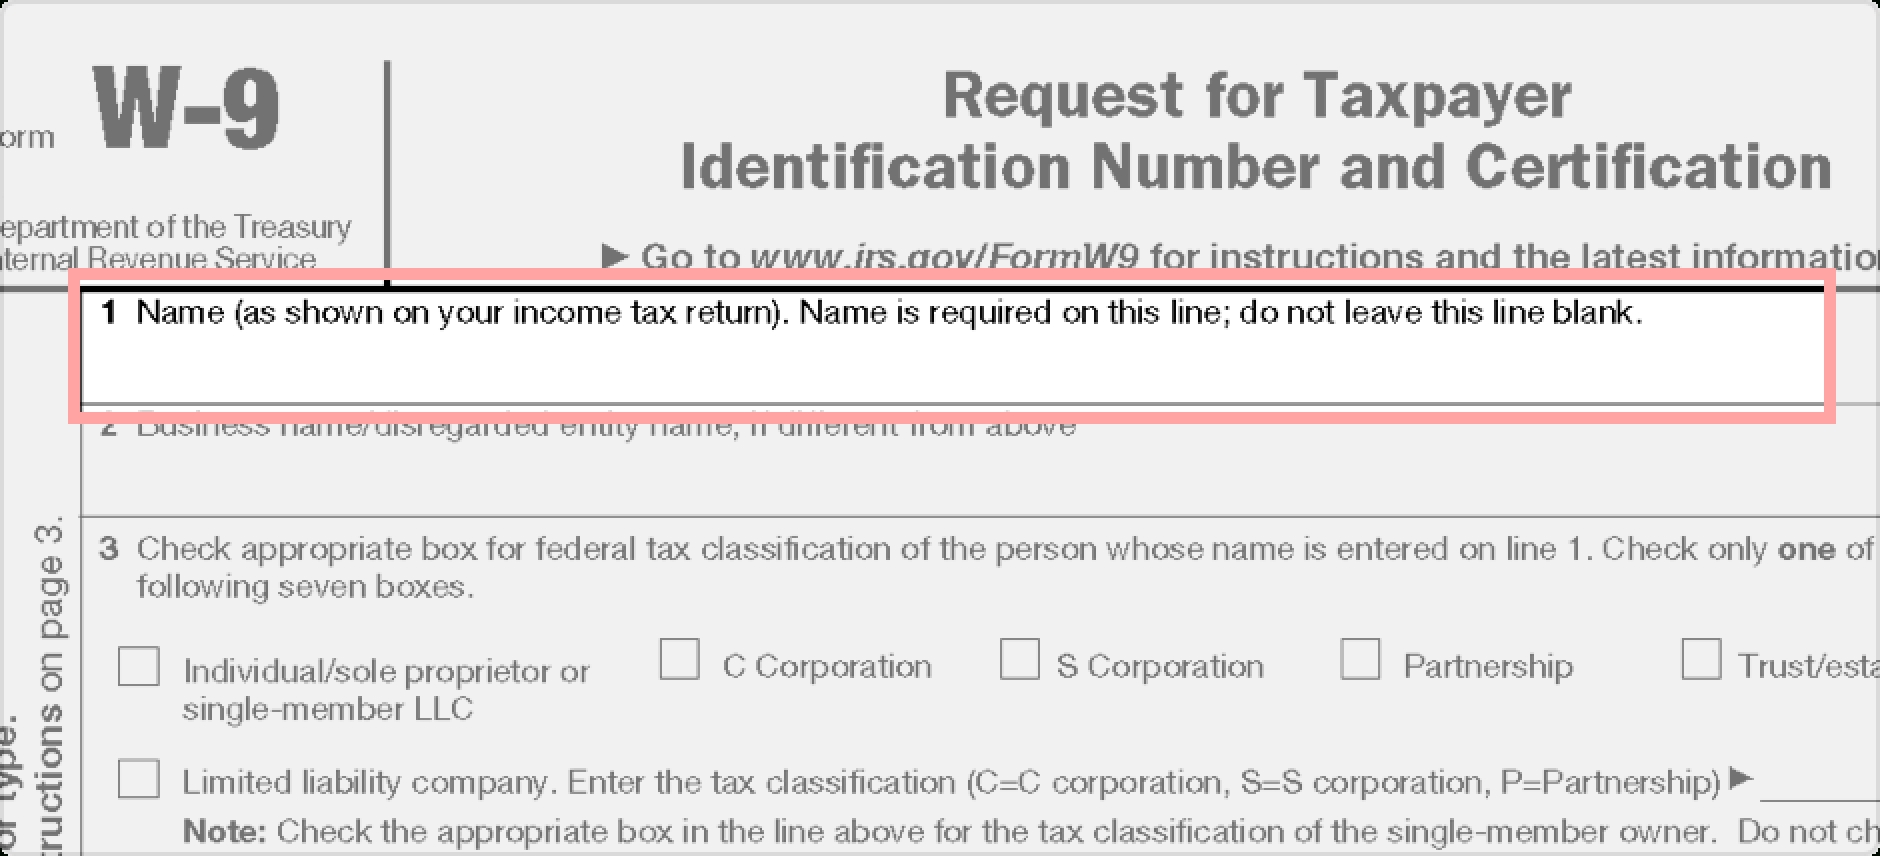 W-9 Form: Fillable, Printable, Download Free. 2019 Instructions-Blank 2020 W9 Form